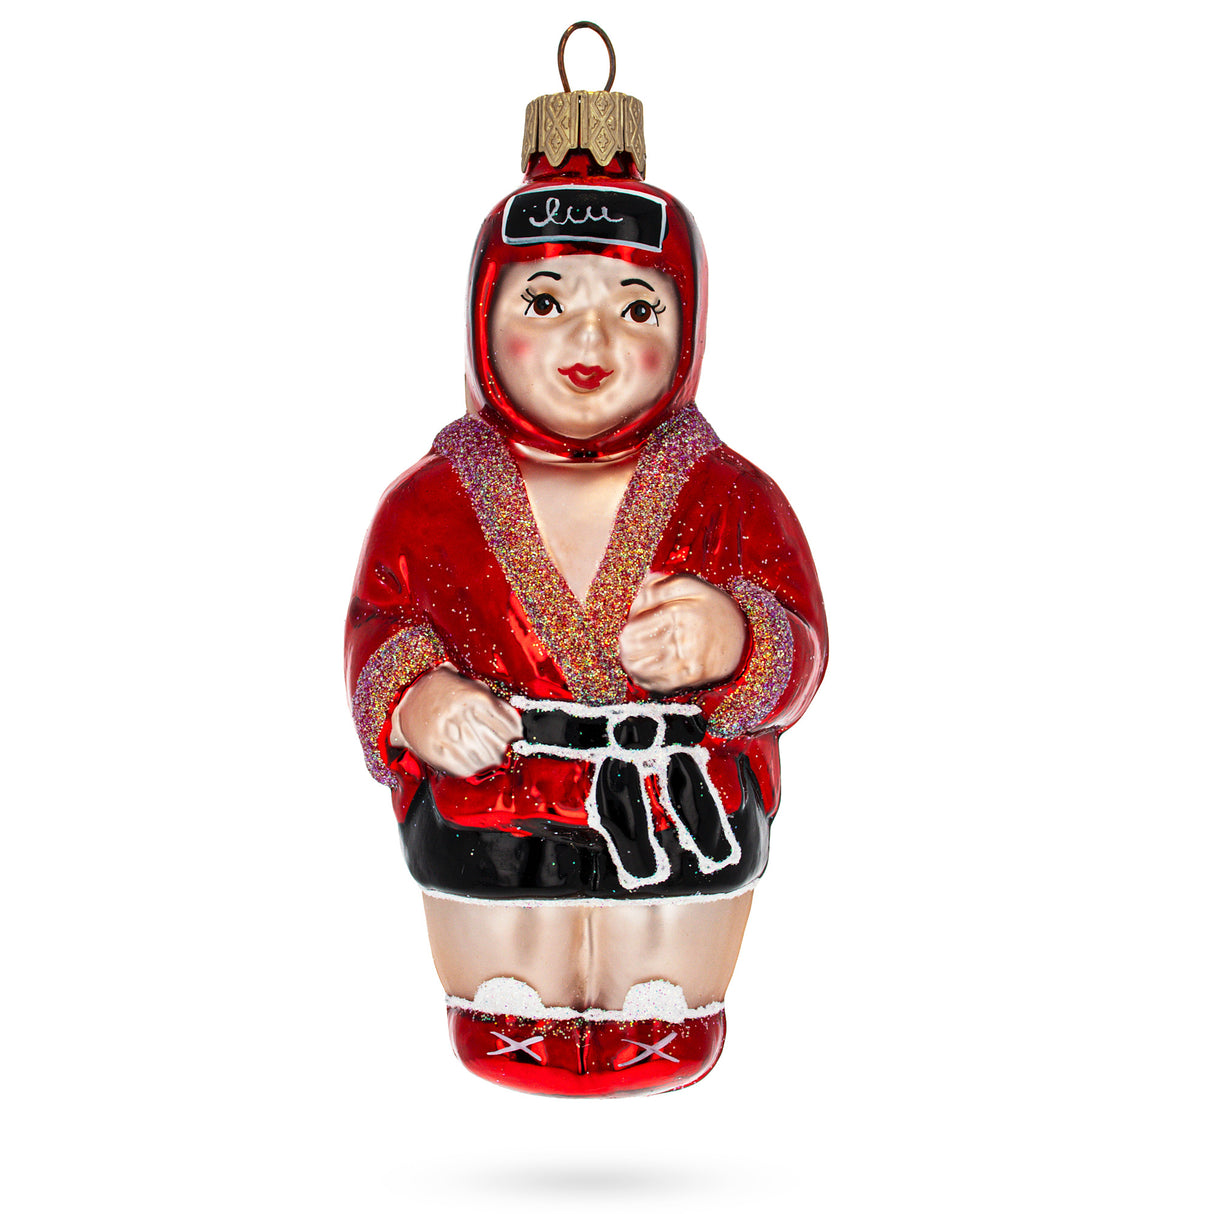 Martial Arts Wrestler in Red Costume Glass Christmas Ornament in Red color,  shape